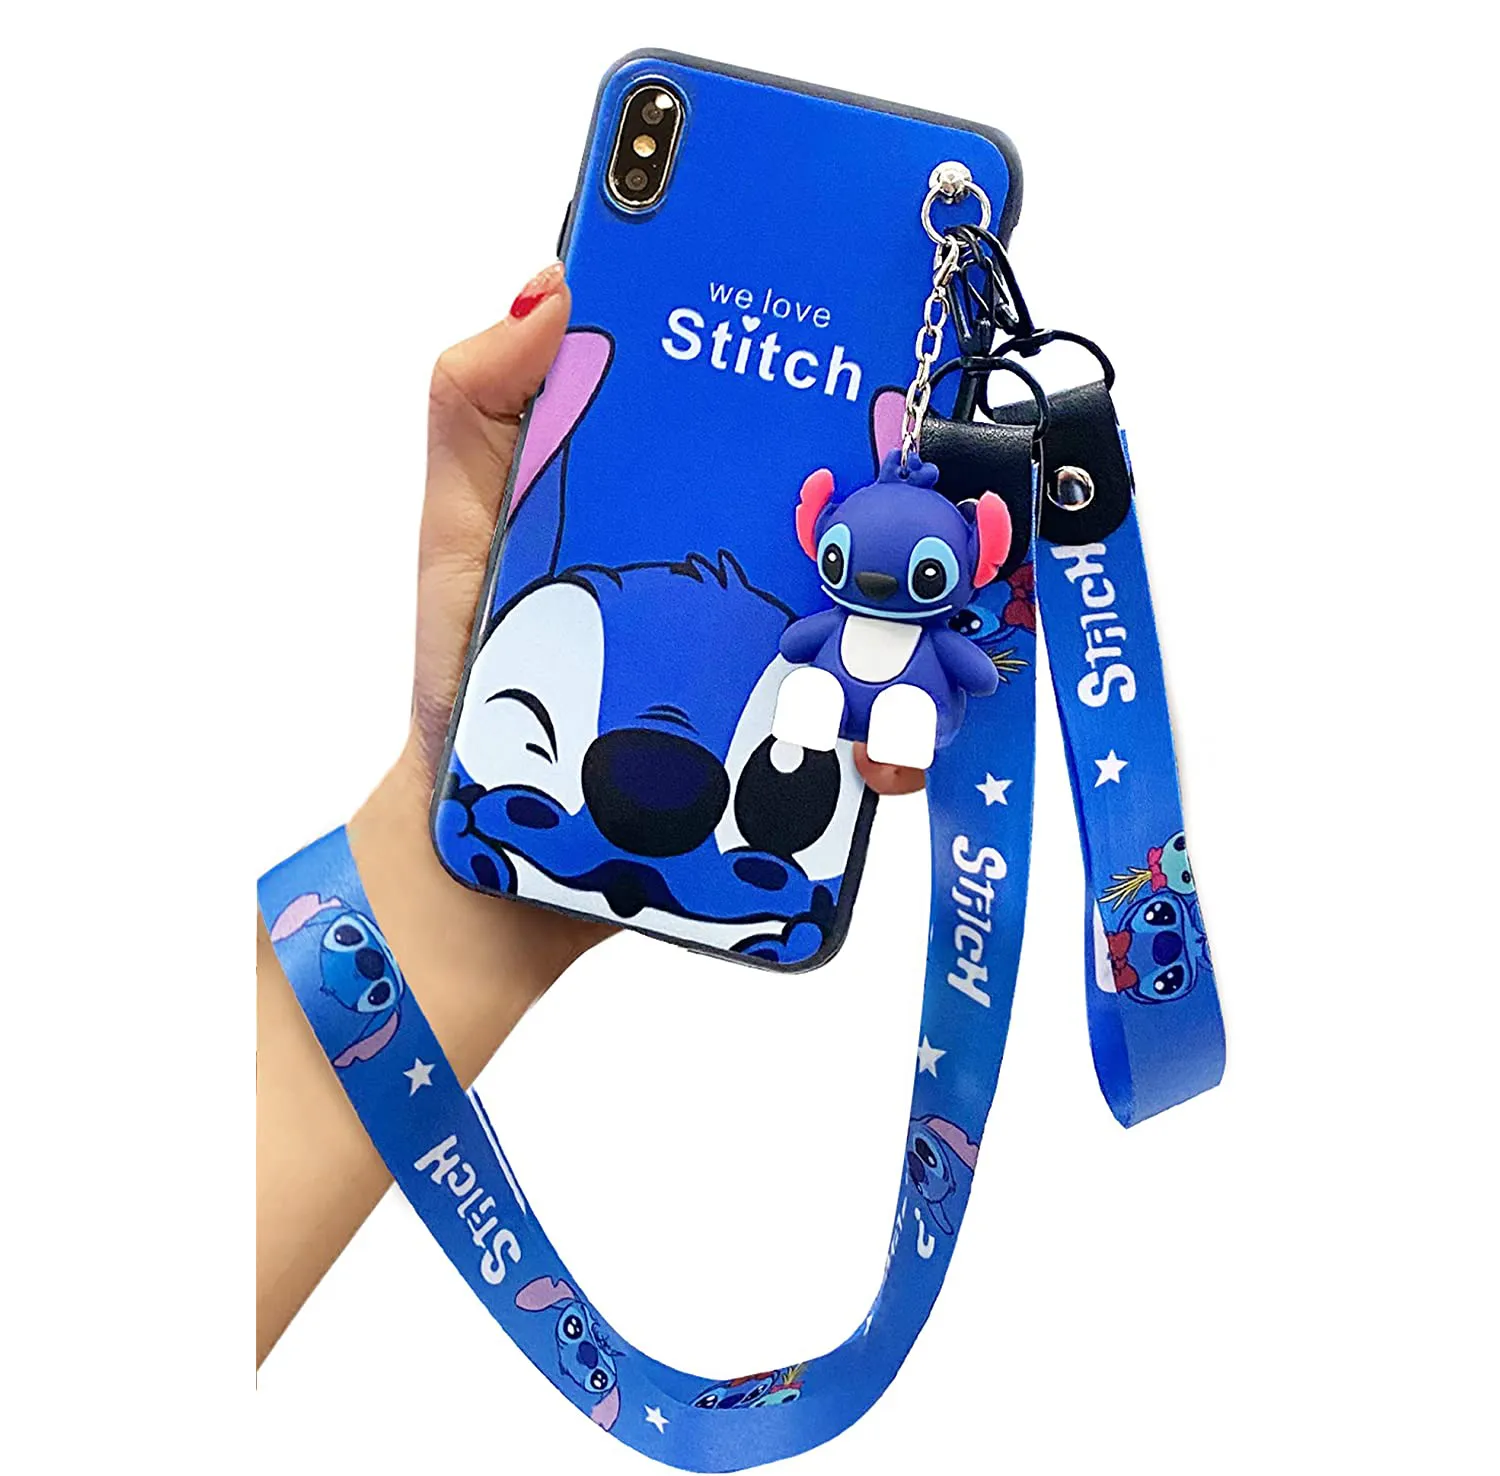 

Stitch For Samsung Galaxy S7 Edge S8 S9 S10 S20 S21 S22 S23 Plus Ultra S21FE Note 9 10 Phone Case With Stand Holder Strap Rope